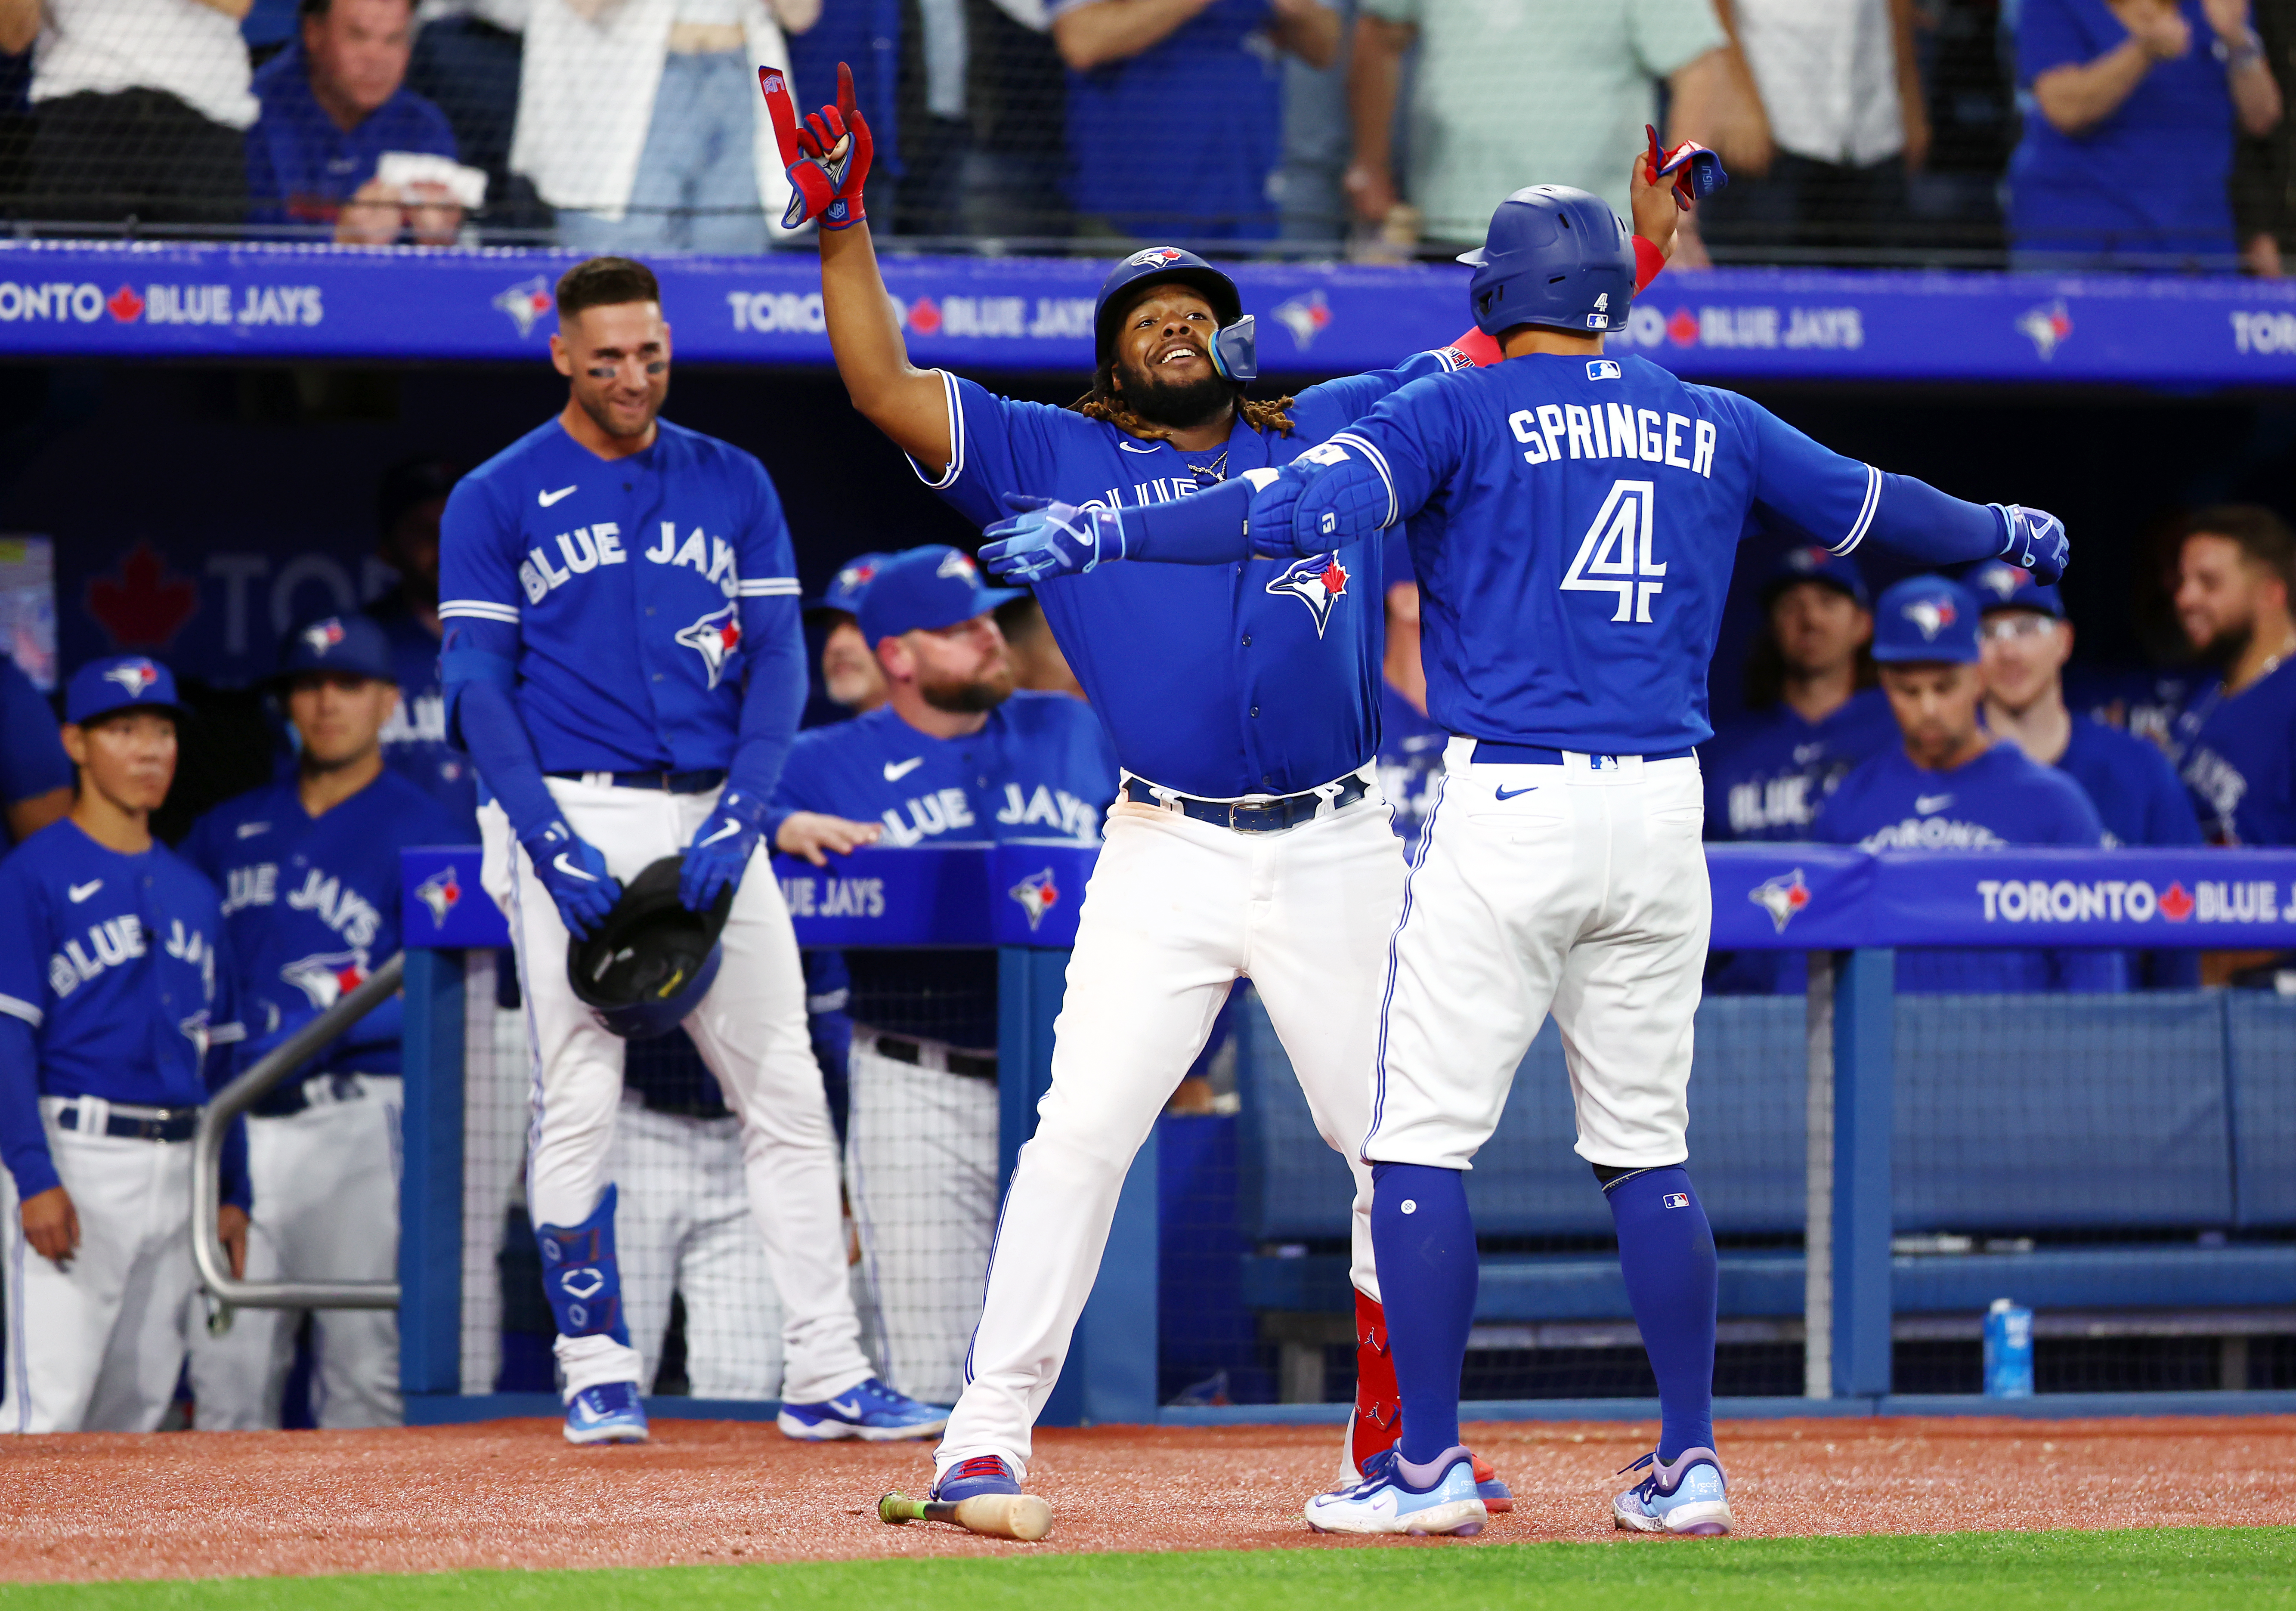 The stadium – and team – is better at Blue Jays home opener - The